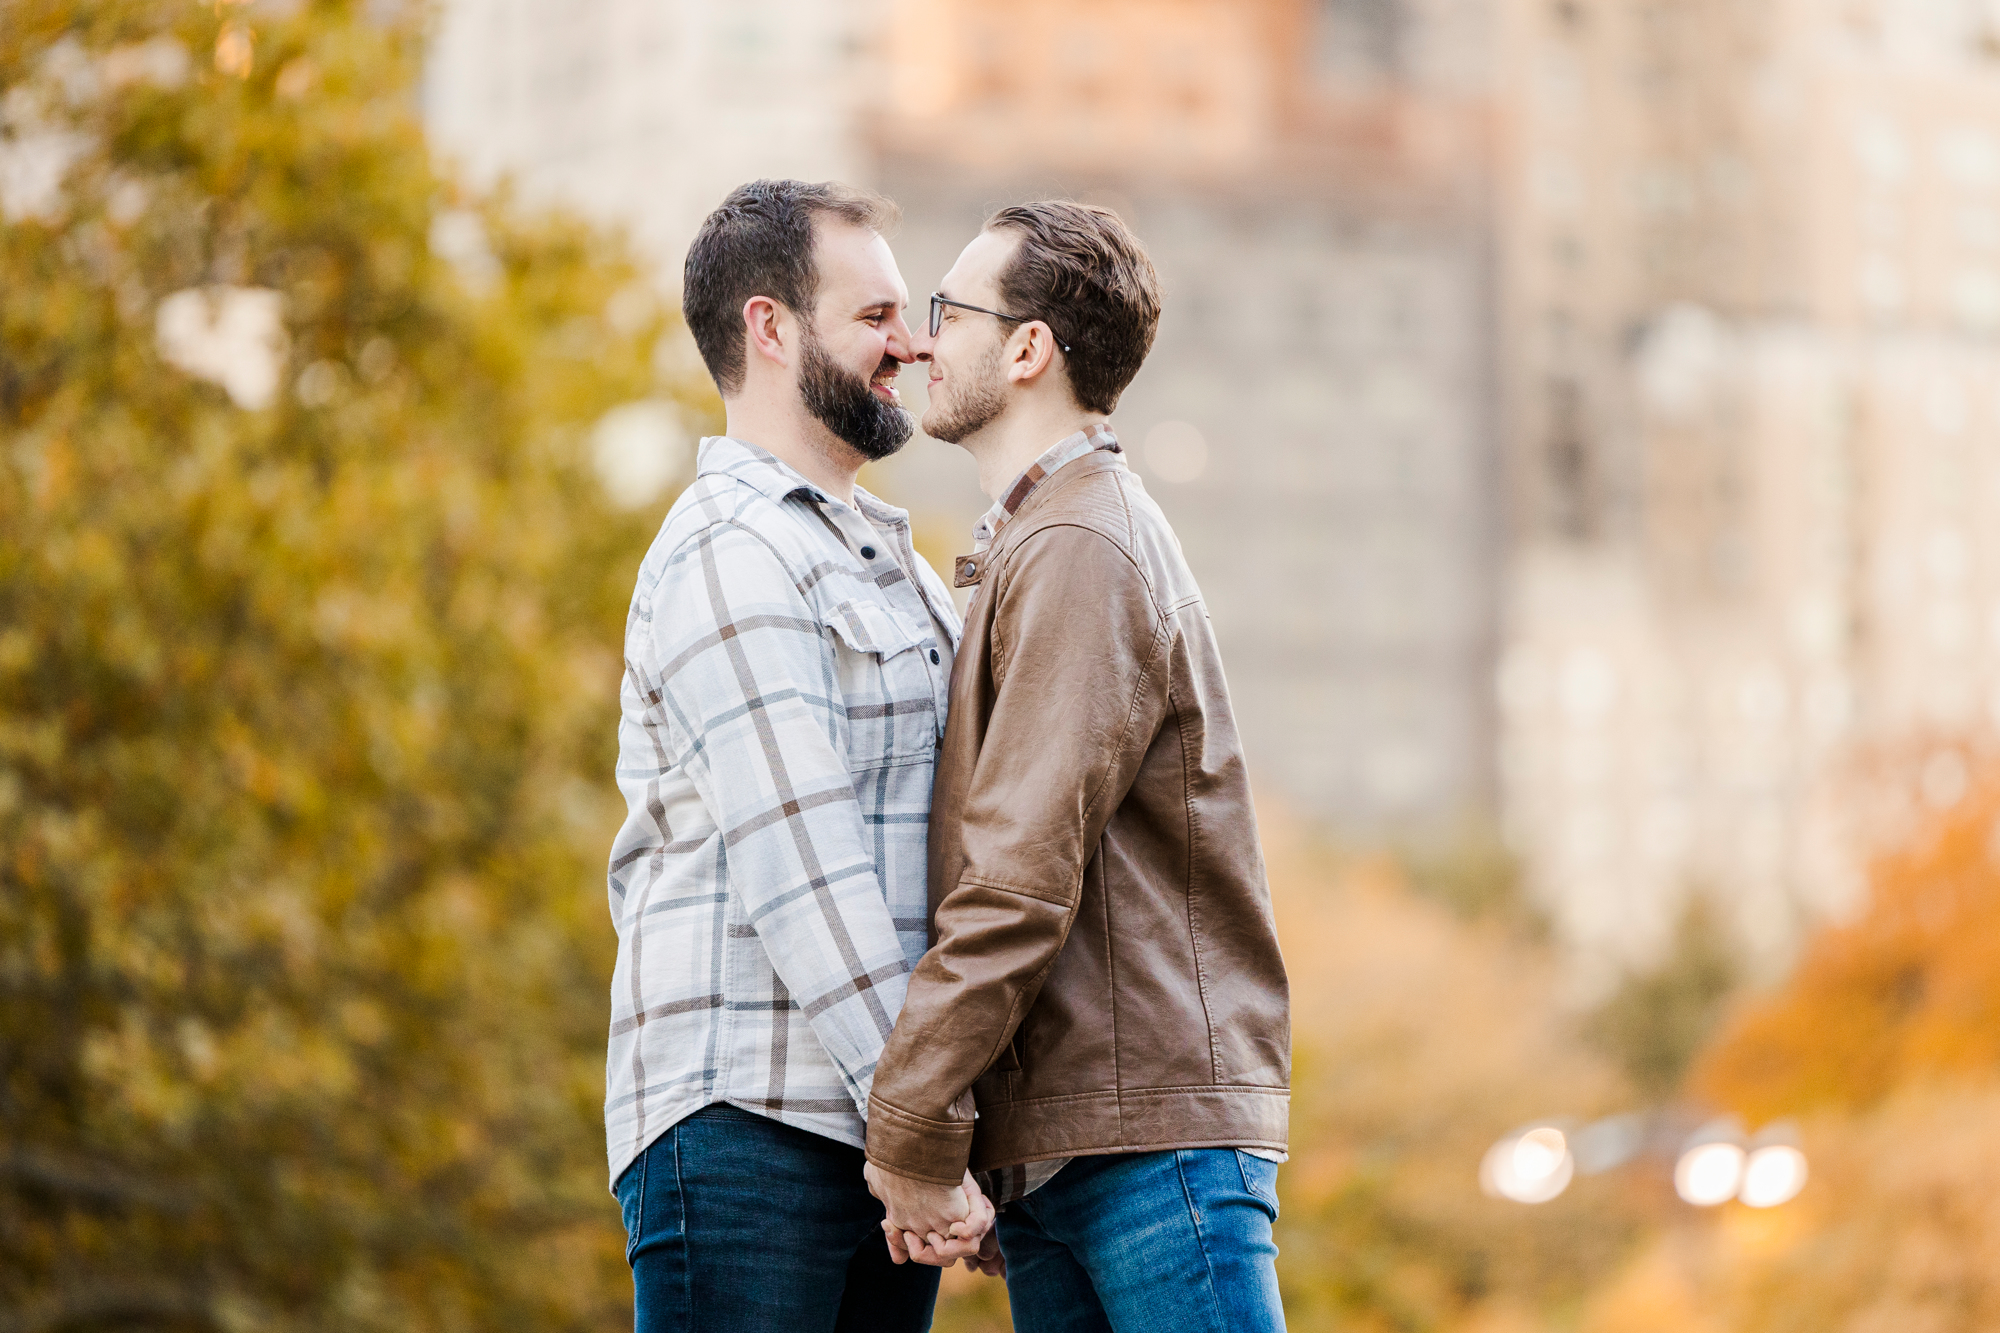 Fun Central Park Engagement Photo Shoot in Fall